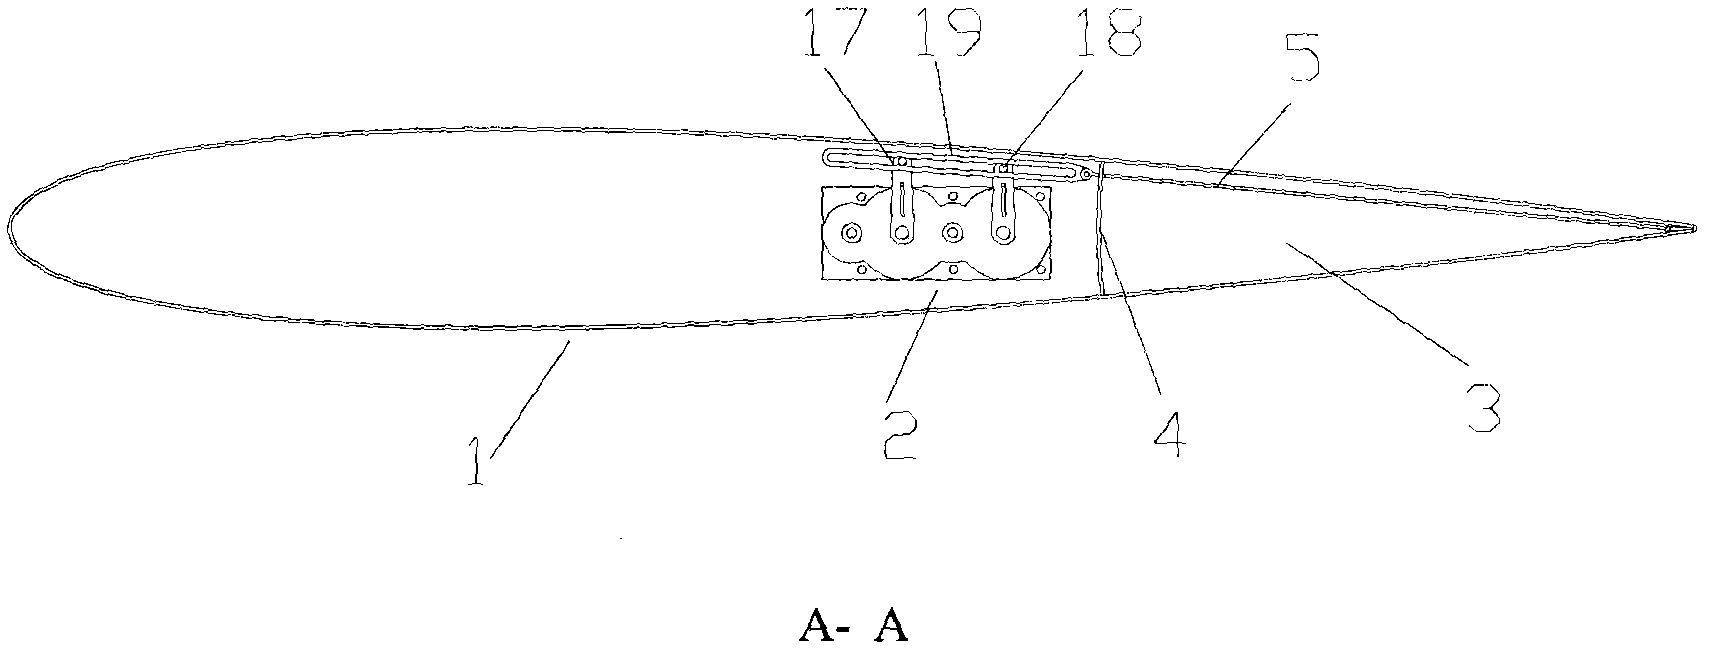 Dynamic controller of hinge-free aircraft